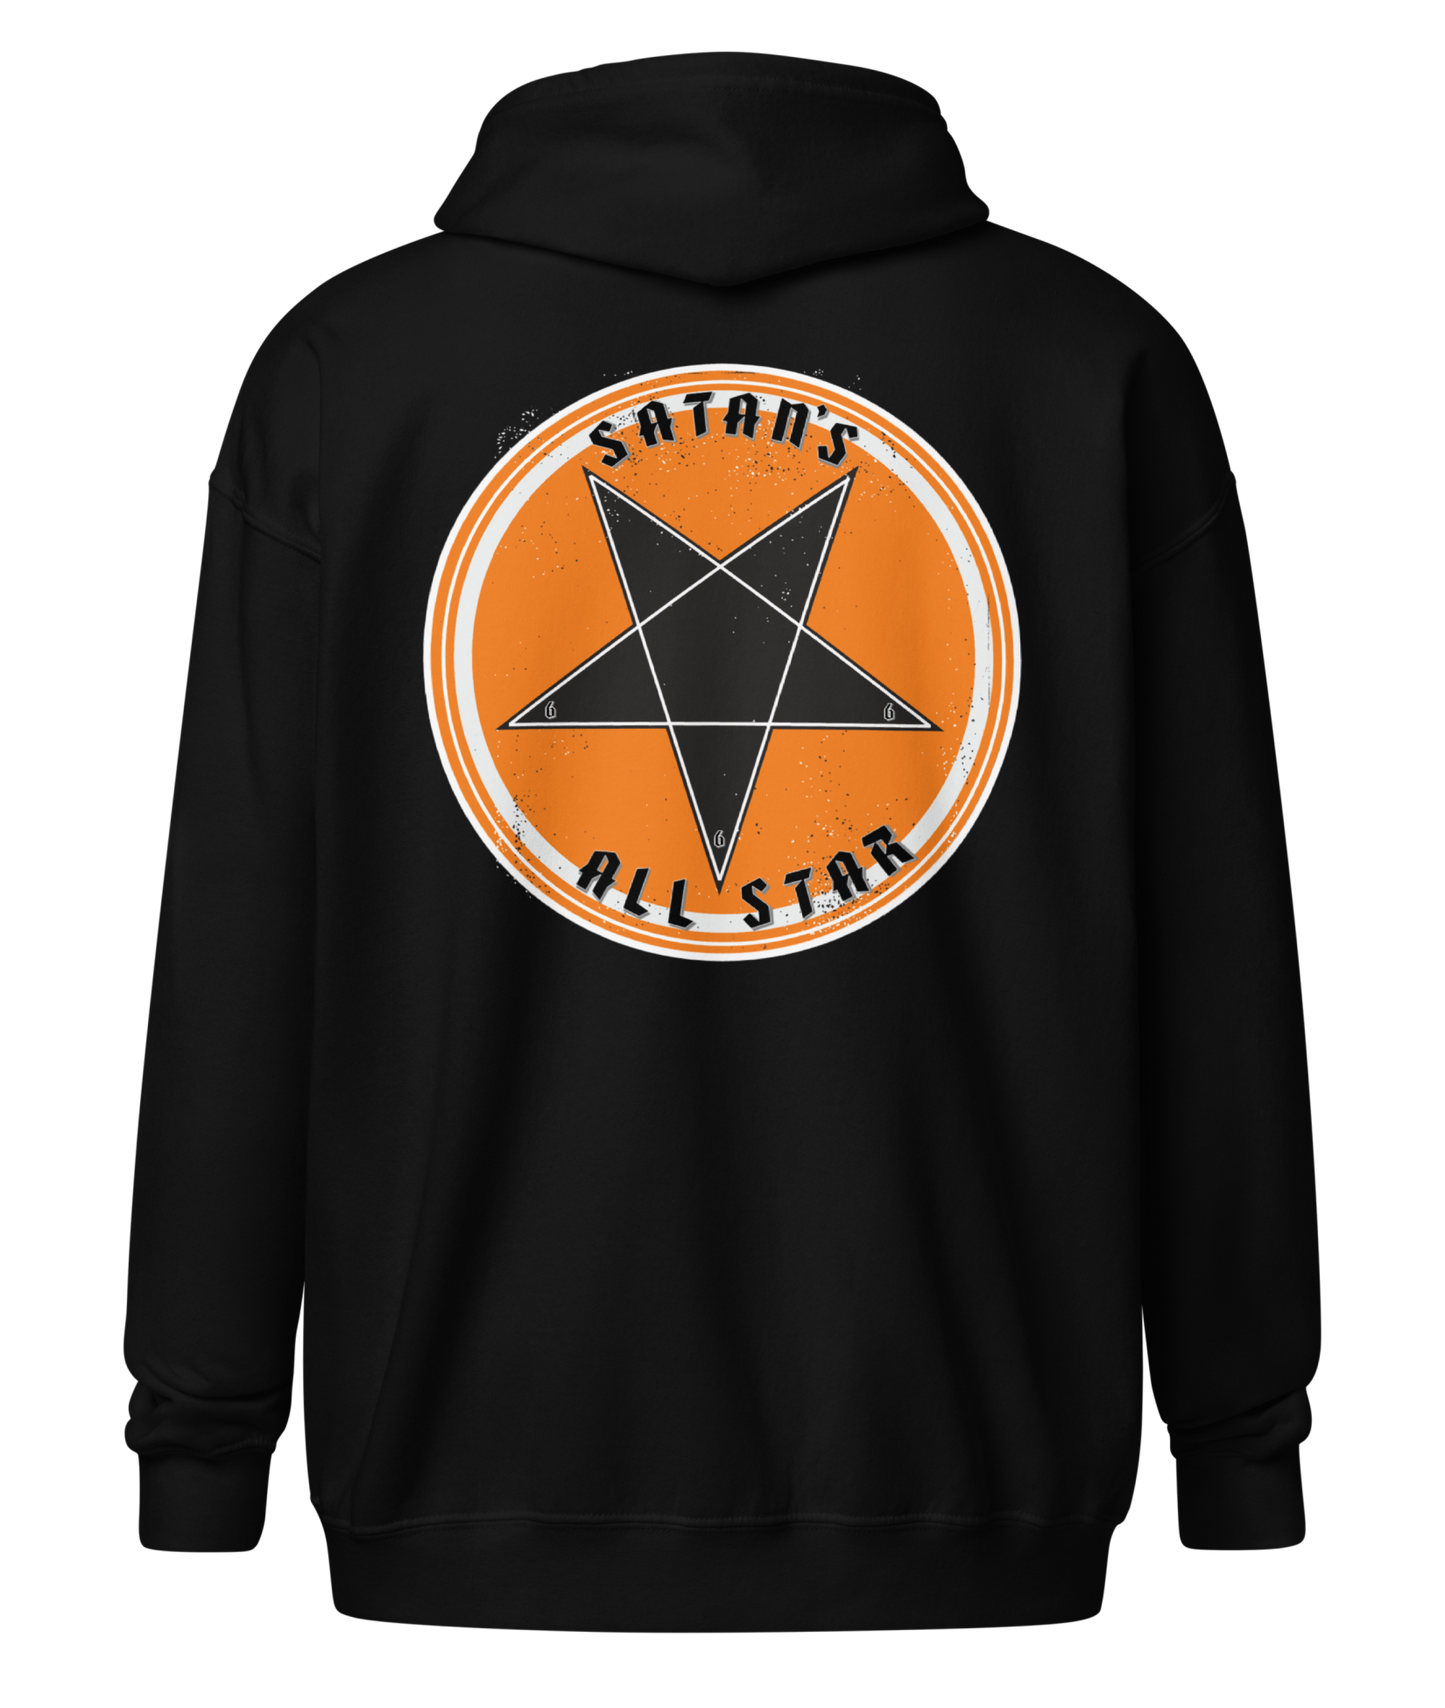 Satan's All Star Zipper Hoodie from Asphalt Anarchist Clothing Co. HOT ROD KUSTOM KULTURE APPAREL & PRODUCTS